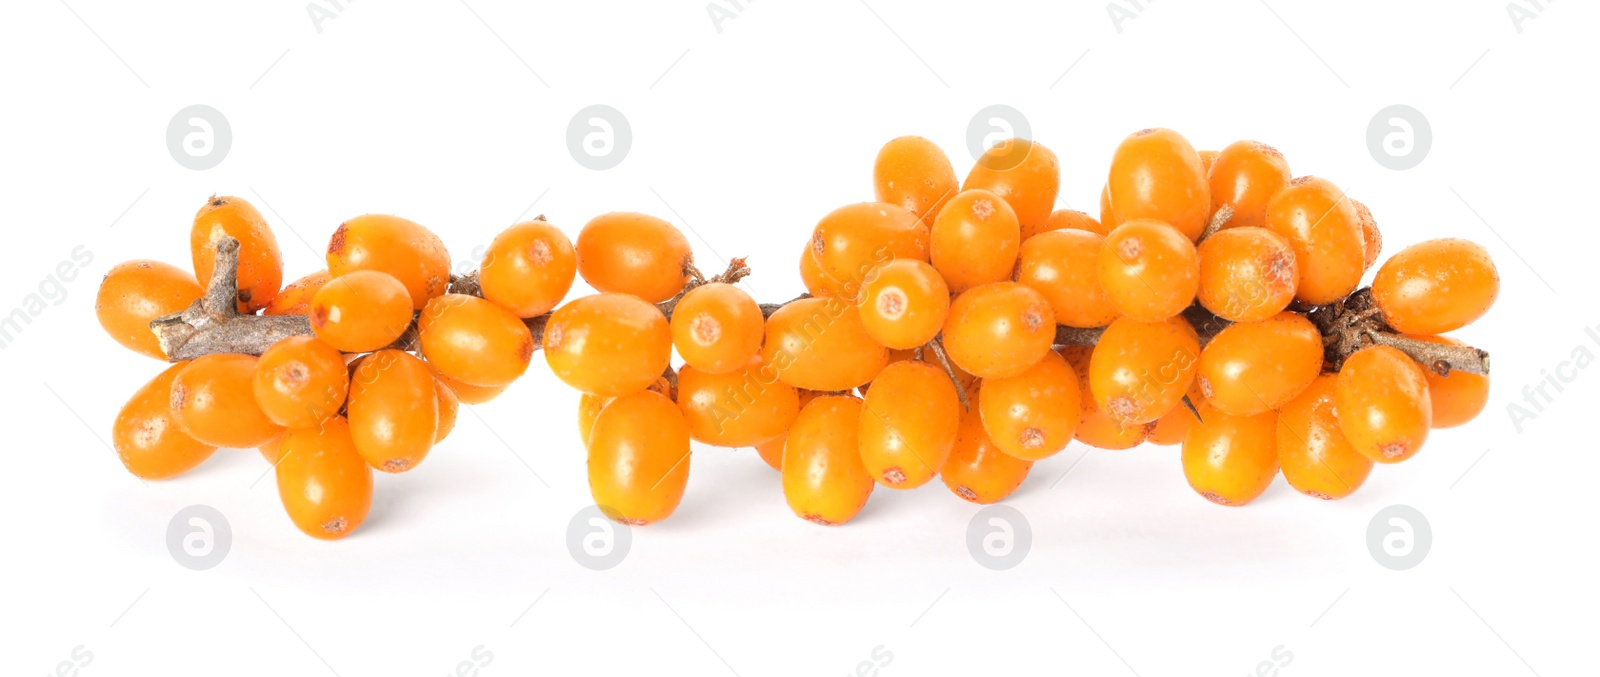 Photo of Sea buckthorn branch with ripe berries on white background